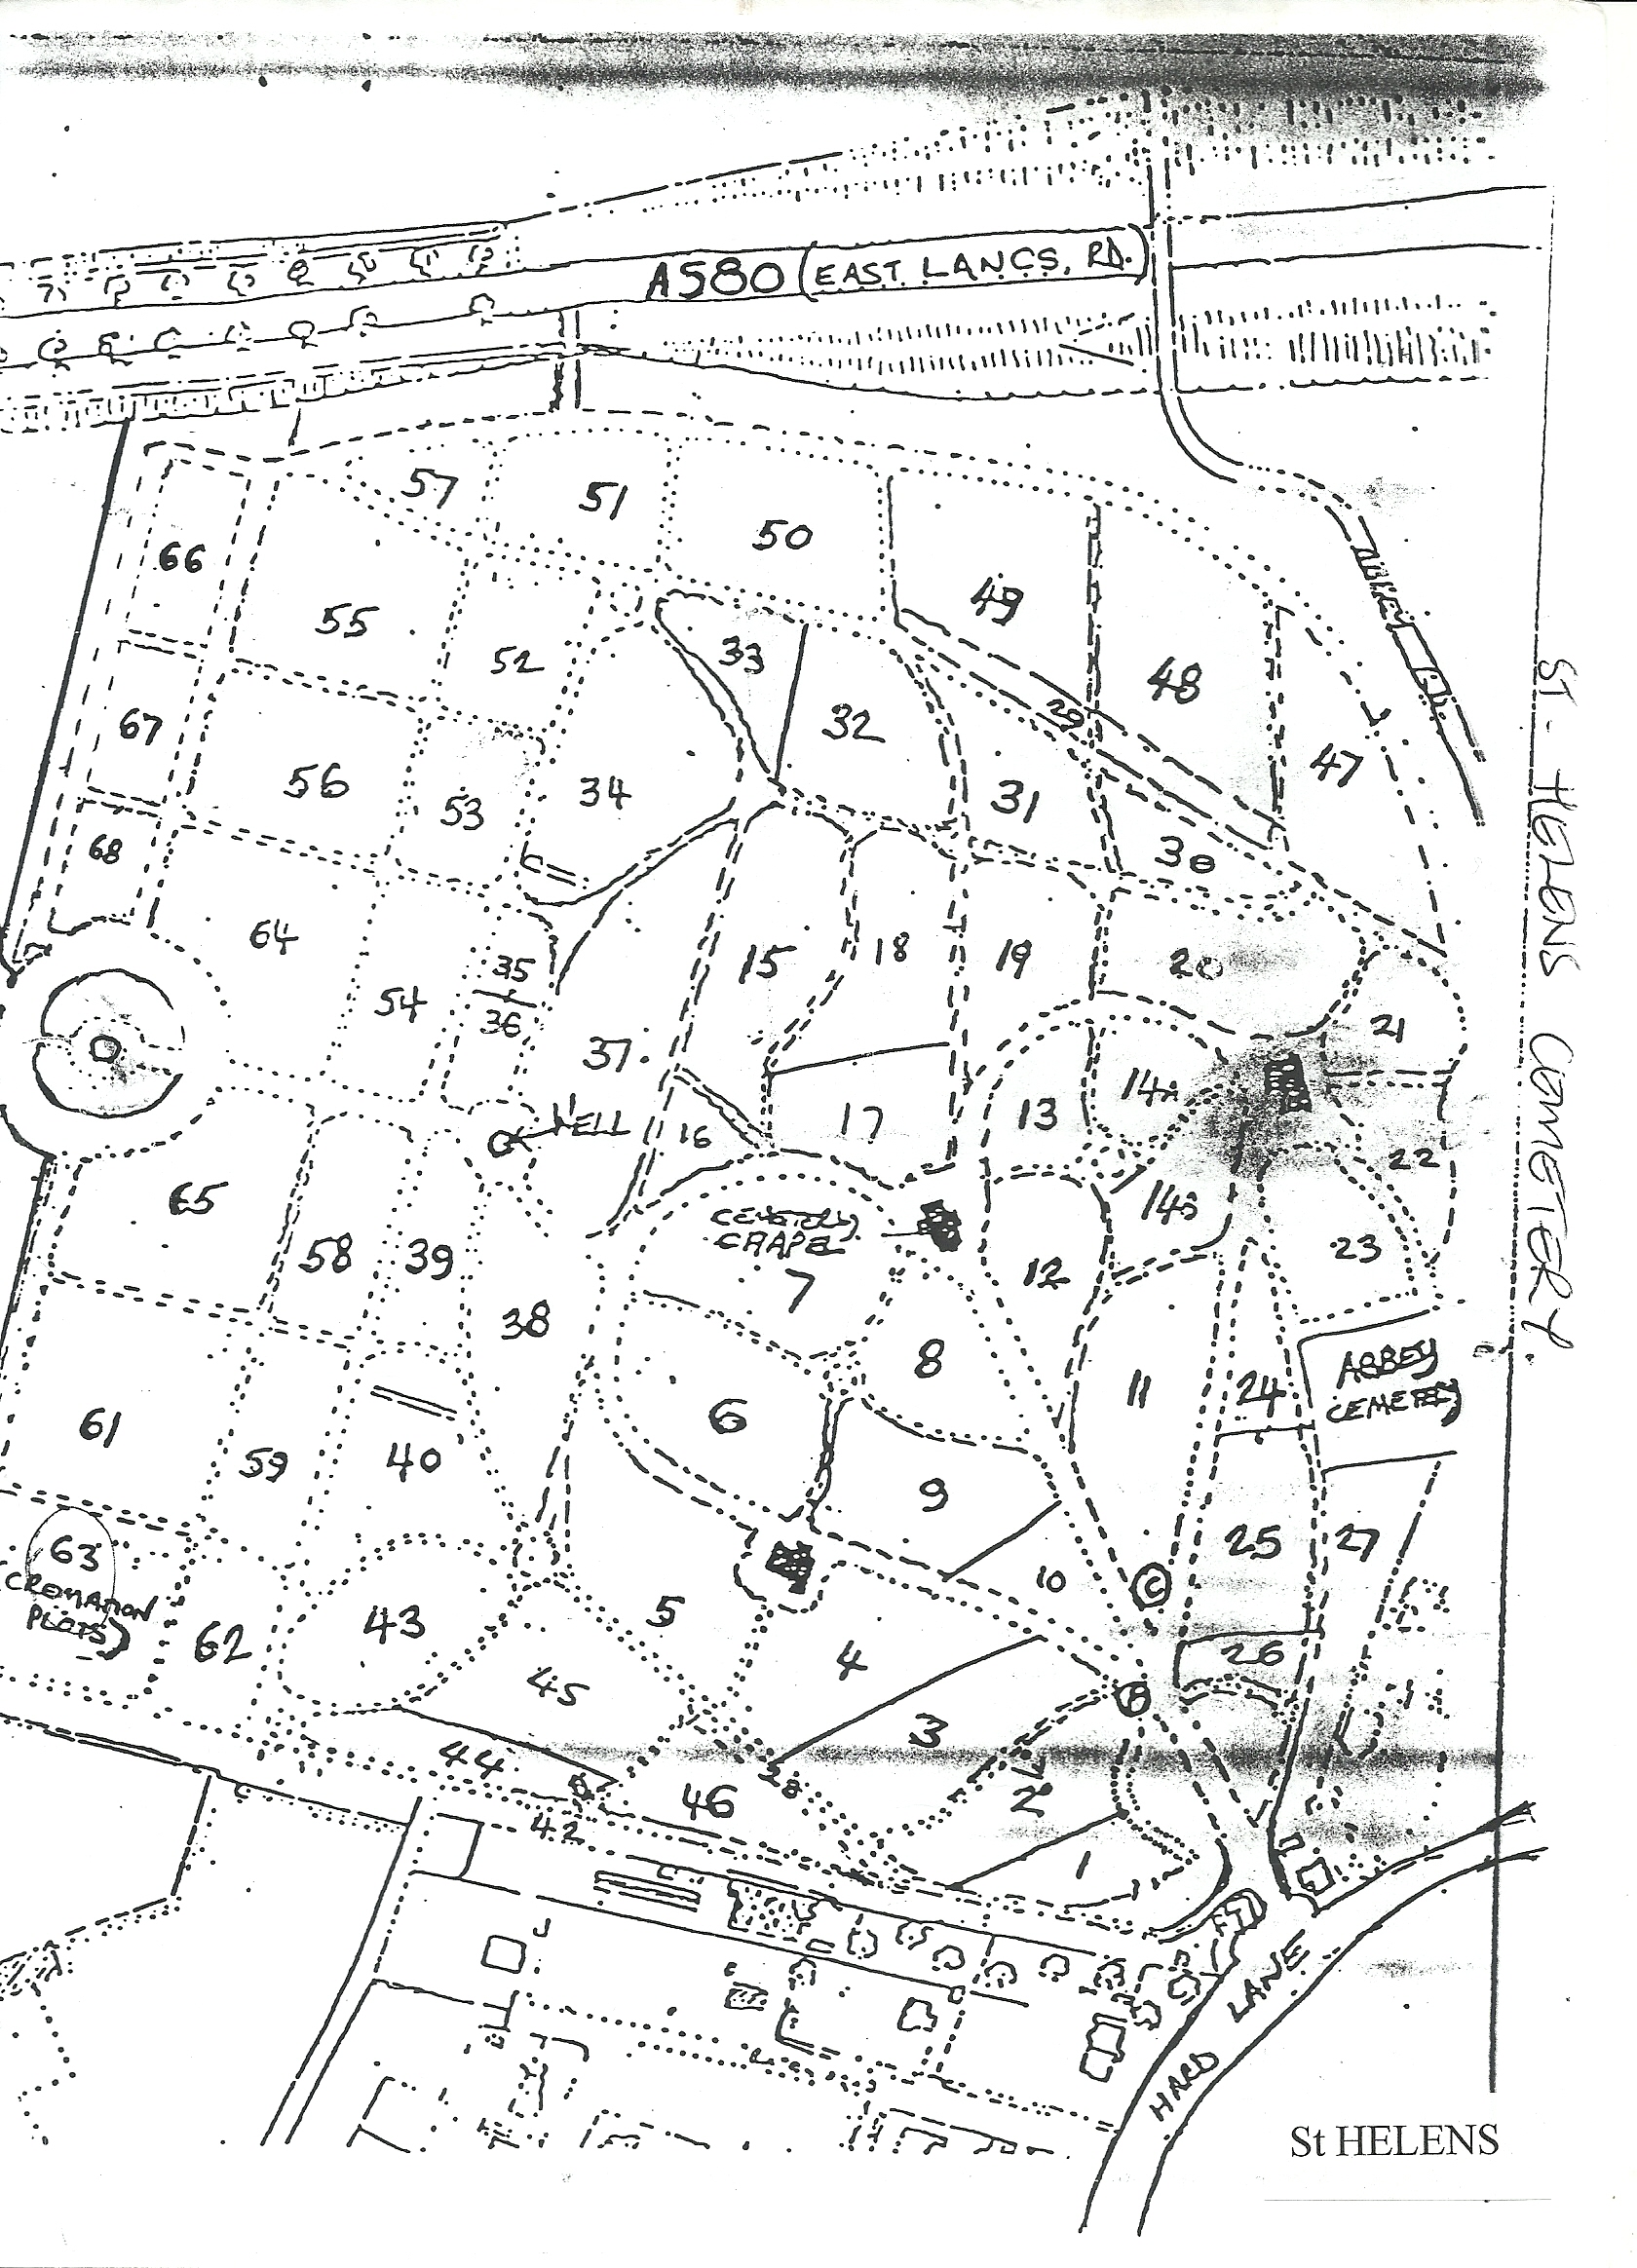 Ford cemetery liverpool map #1